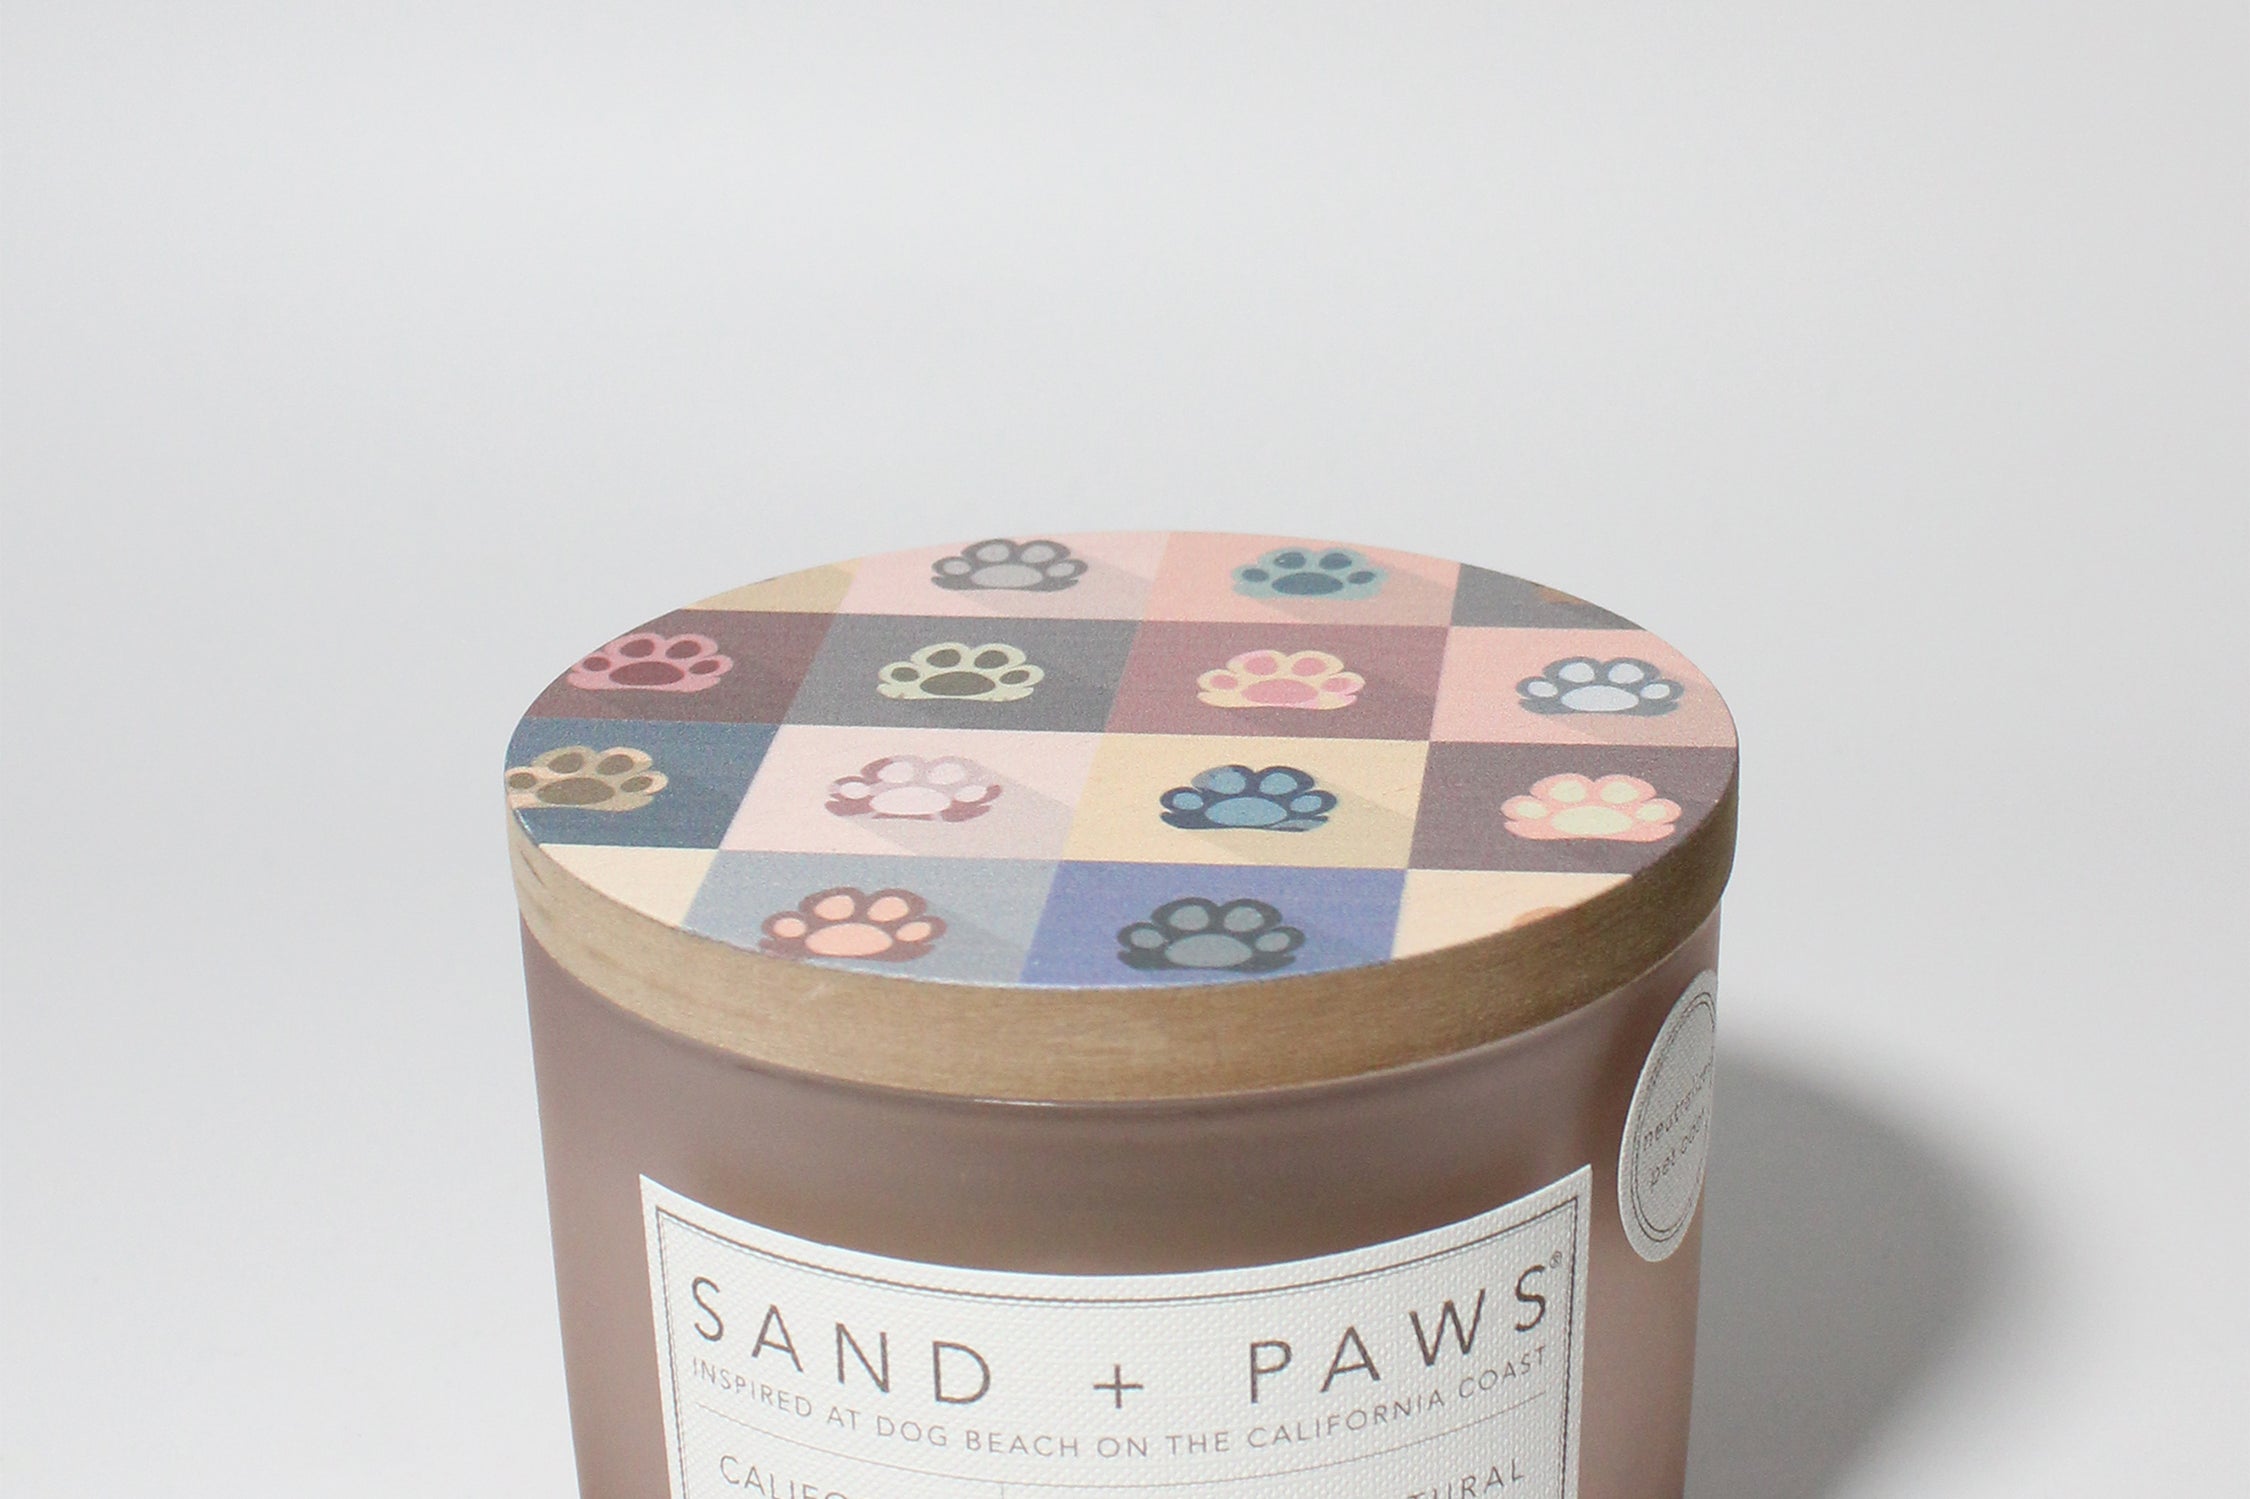 Sand + Paws California Beach House 12 oz scented candle Blush vessel with Painted Paw Grid lid